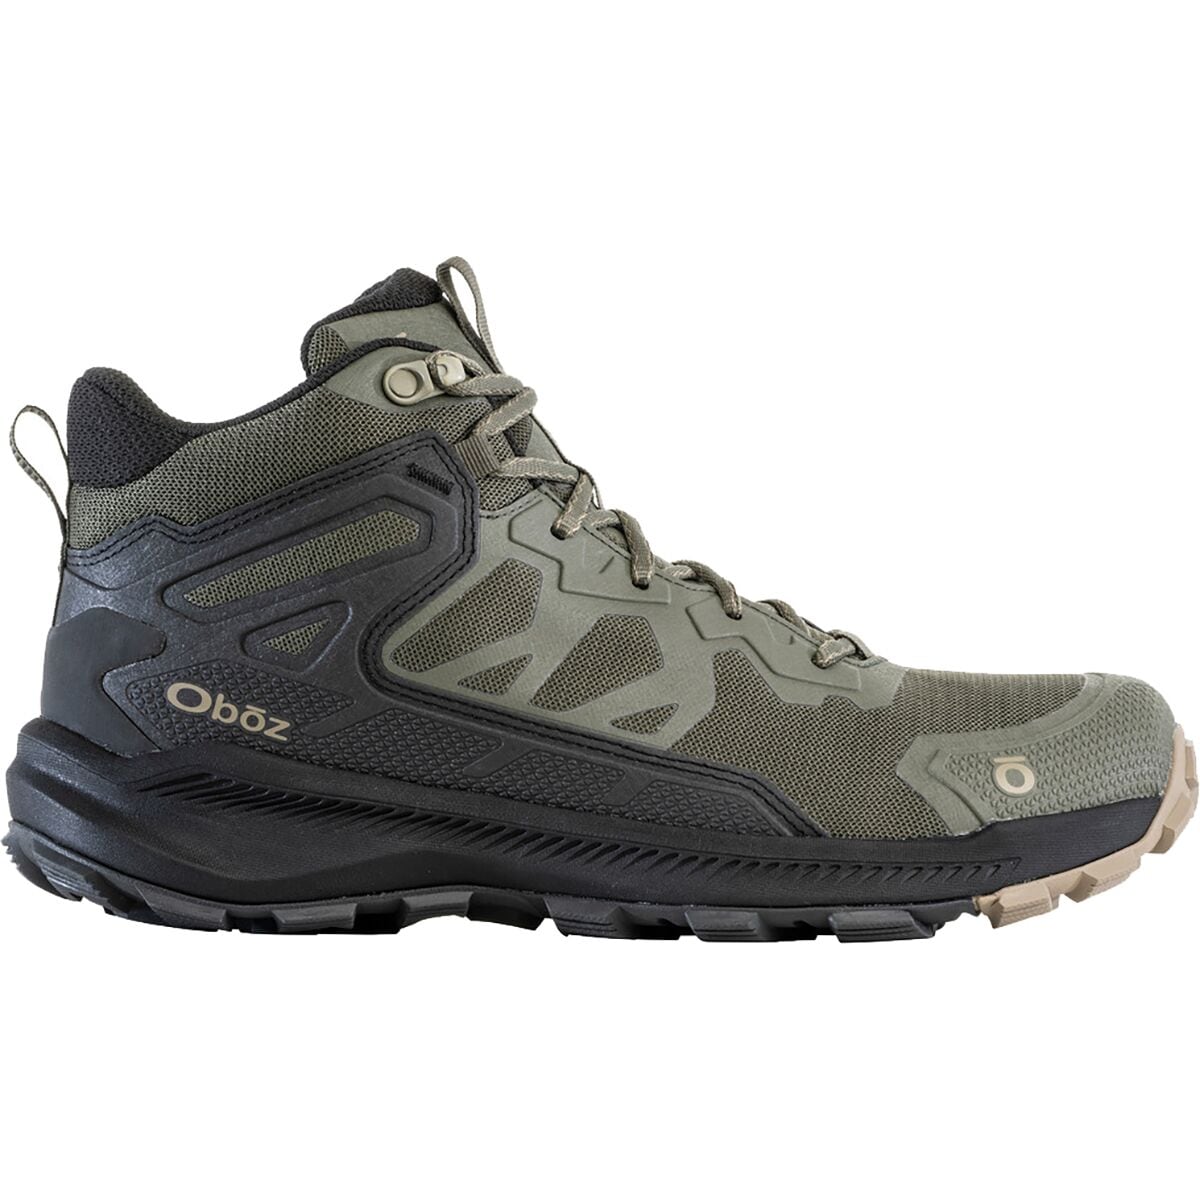 Men's Hiking & Backpacking Boots & Shoes | Backcountry.com